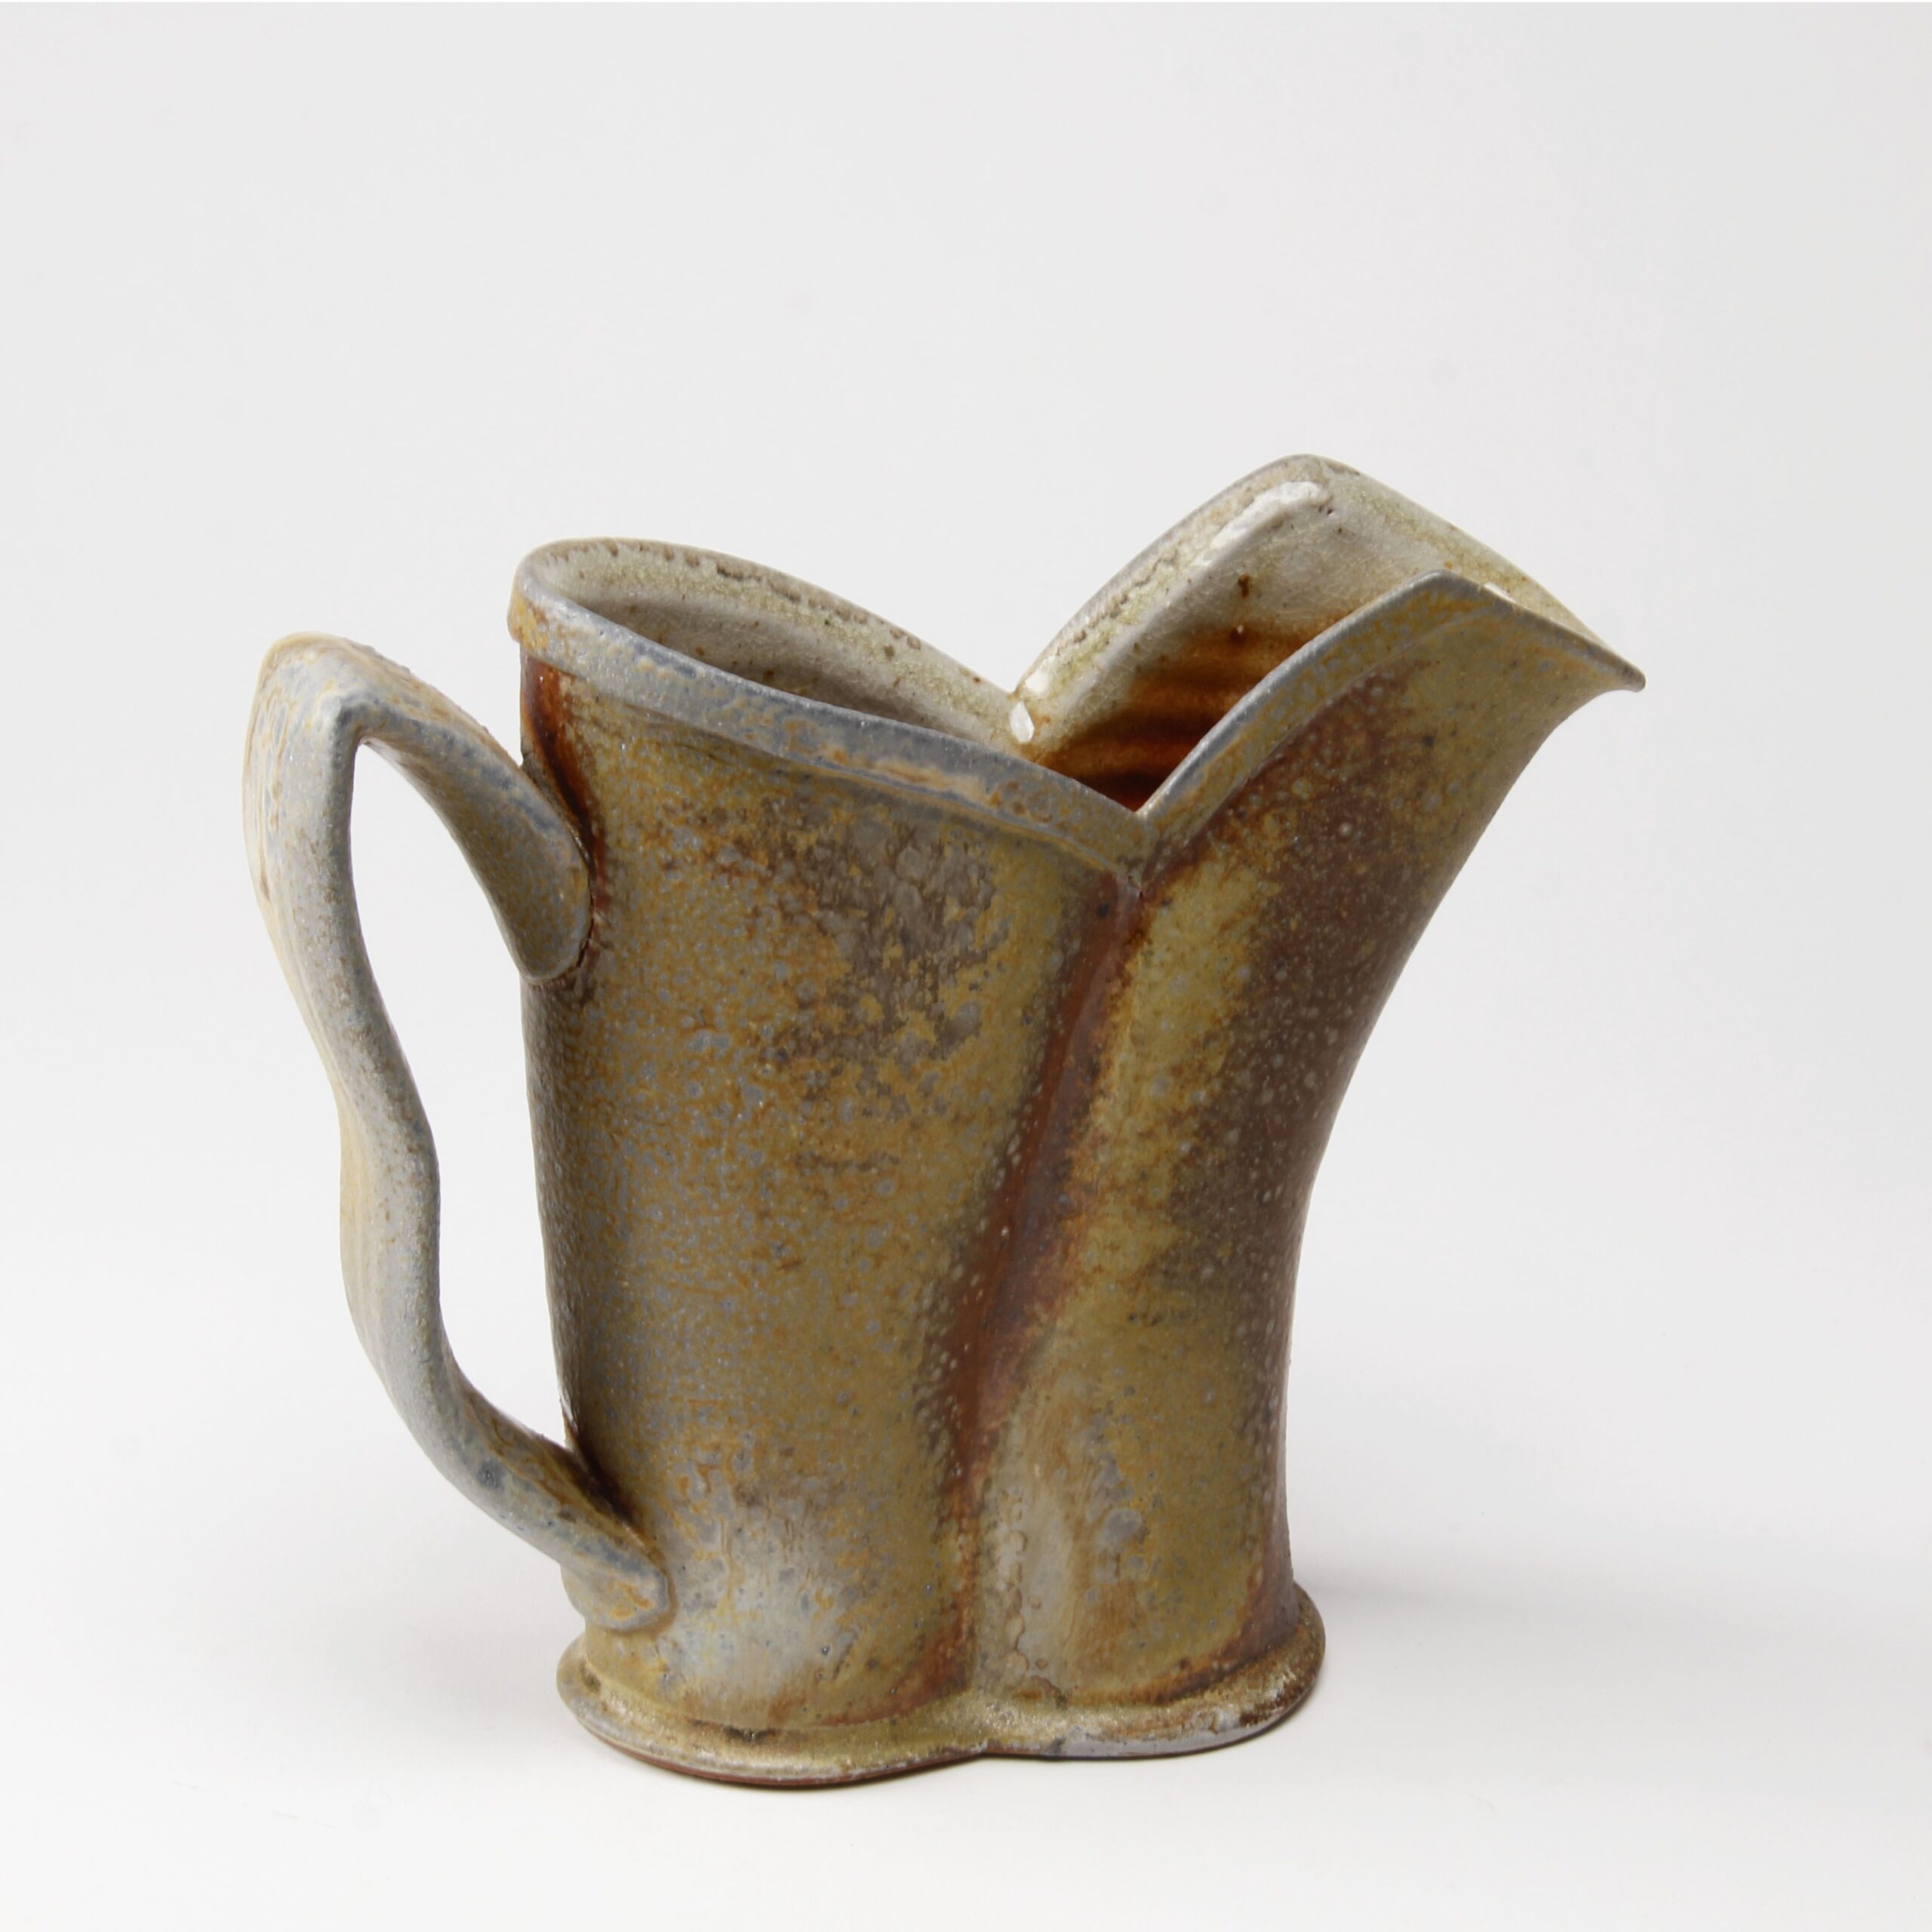 Bruce Cochrane: Rust Pitcher Product Image 2 of 5